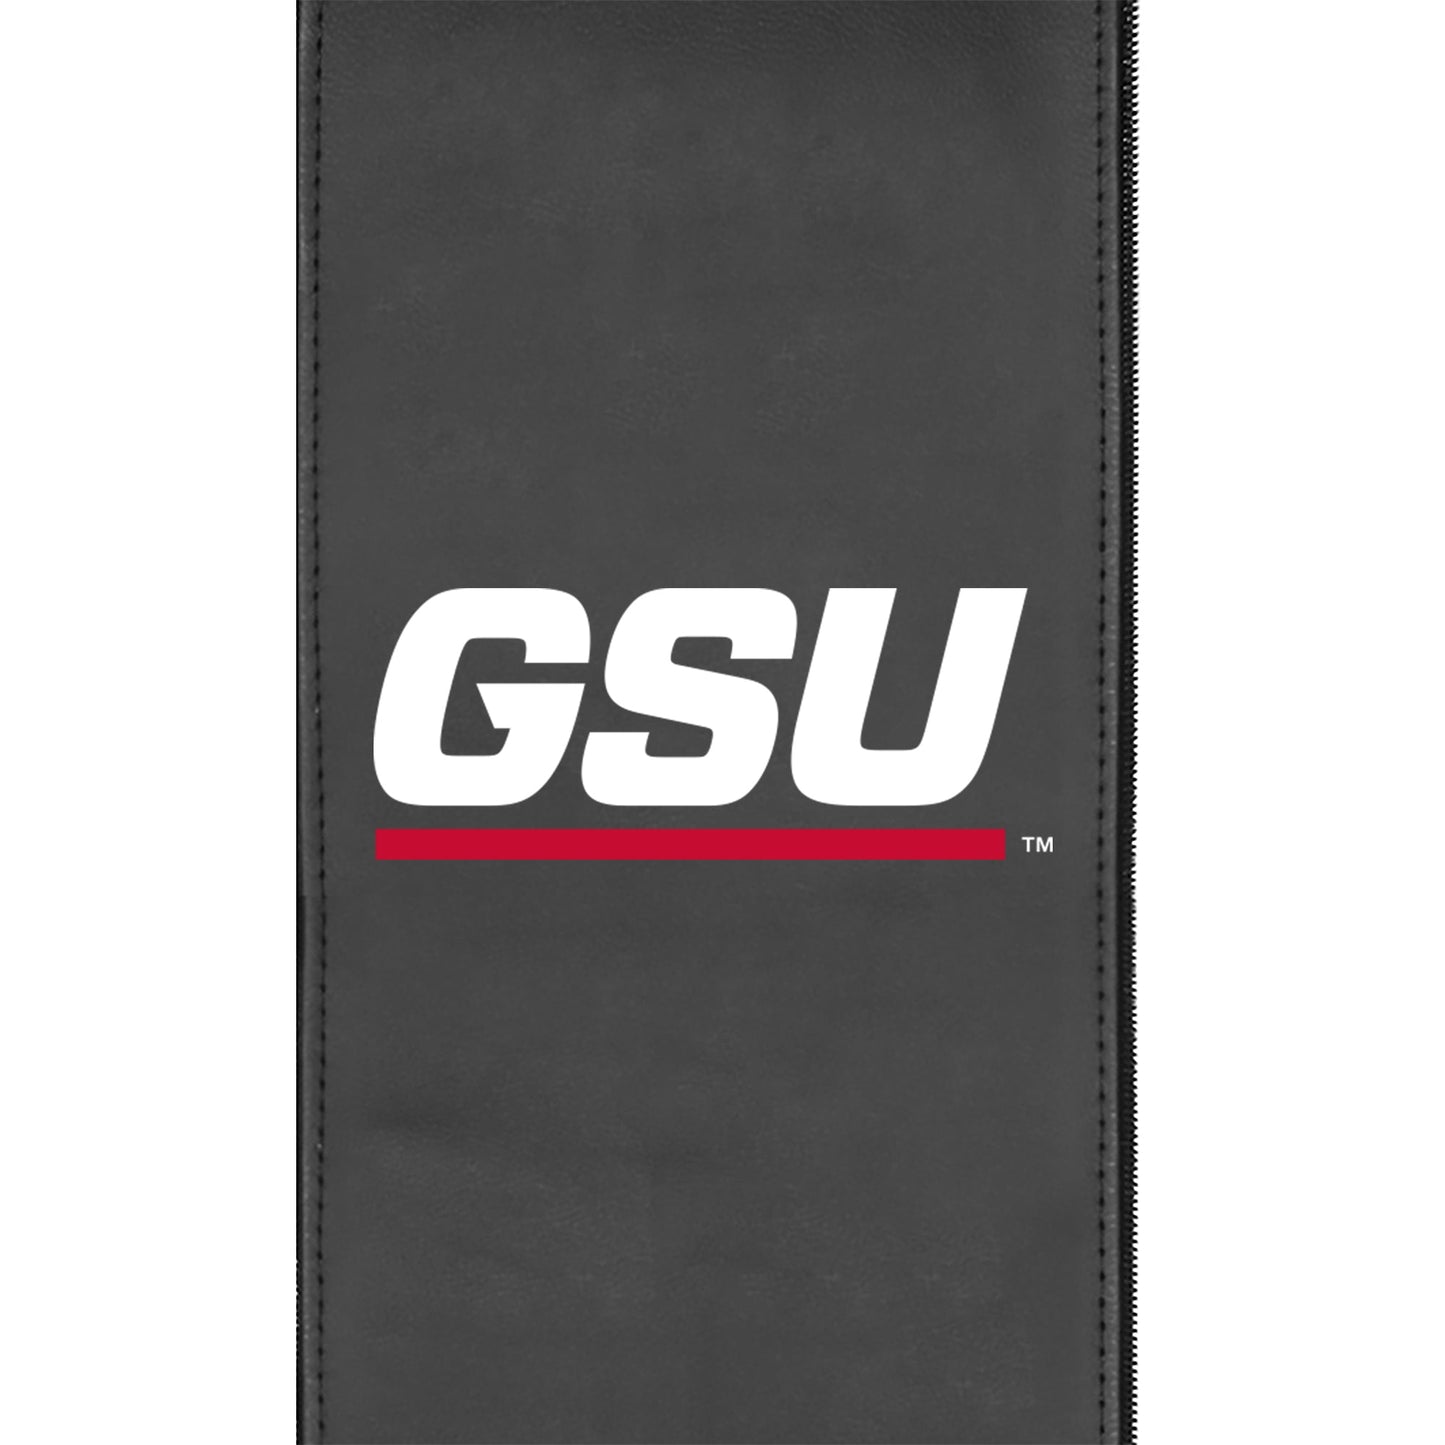 Relax Home Theater Recliner with Georgia State University Secondary Logo